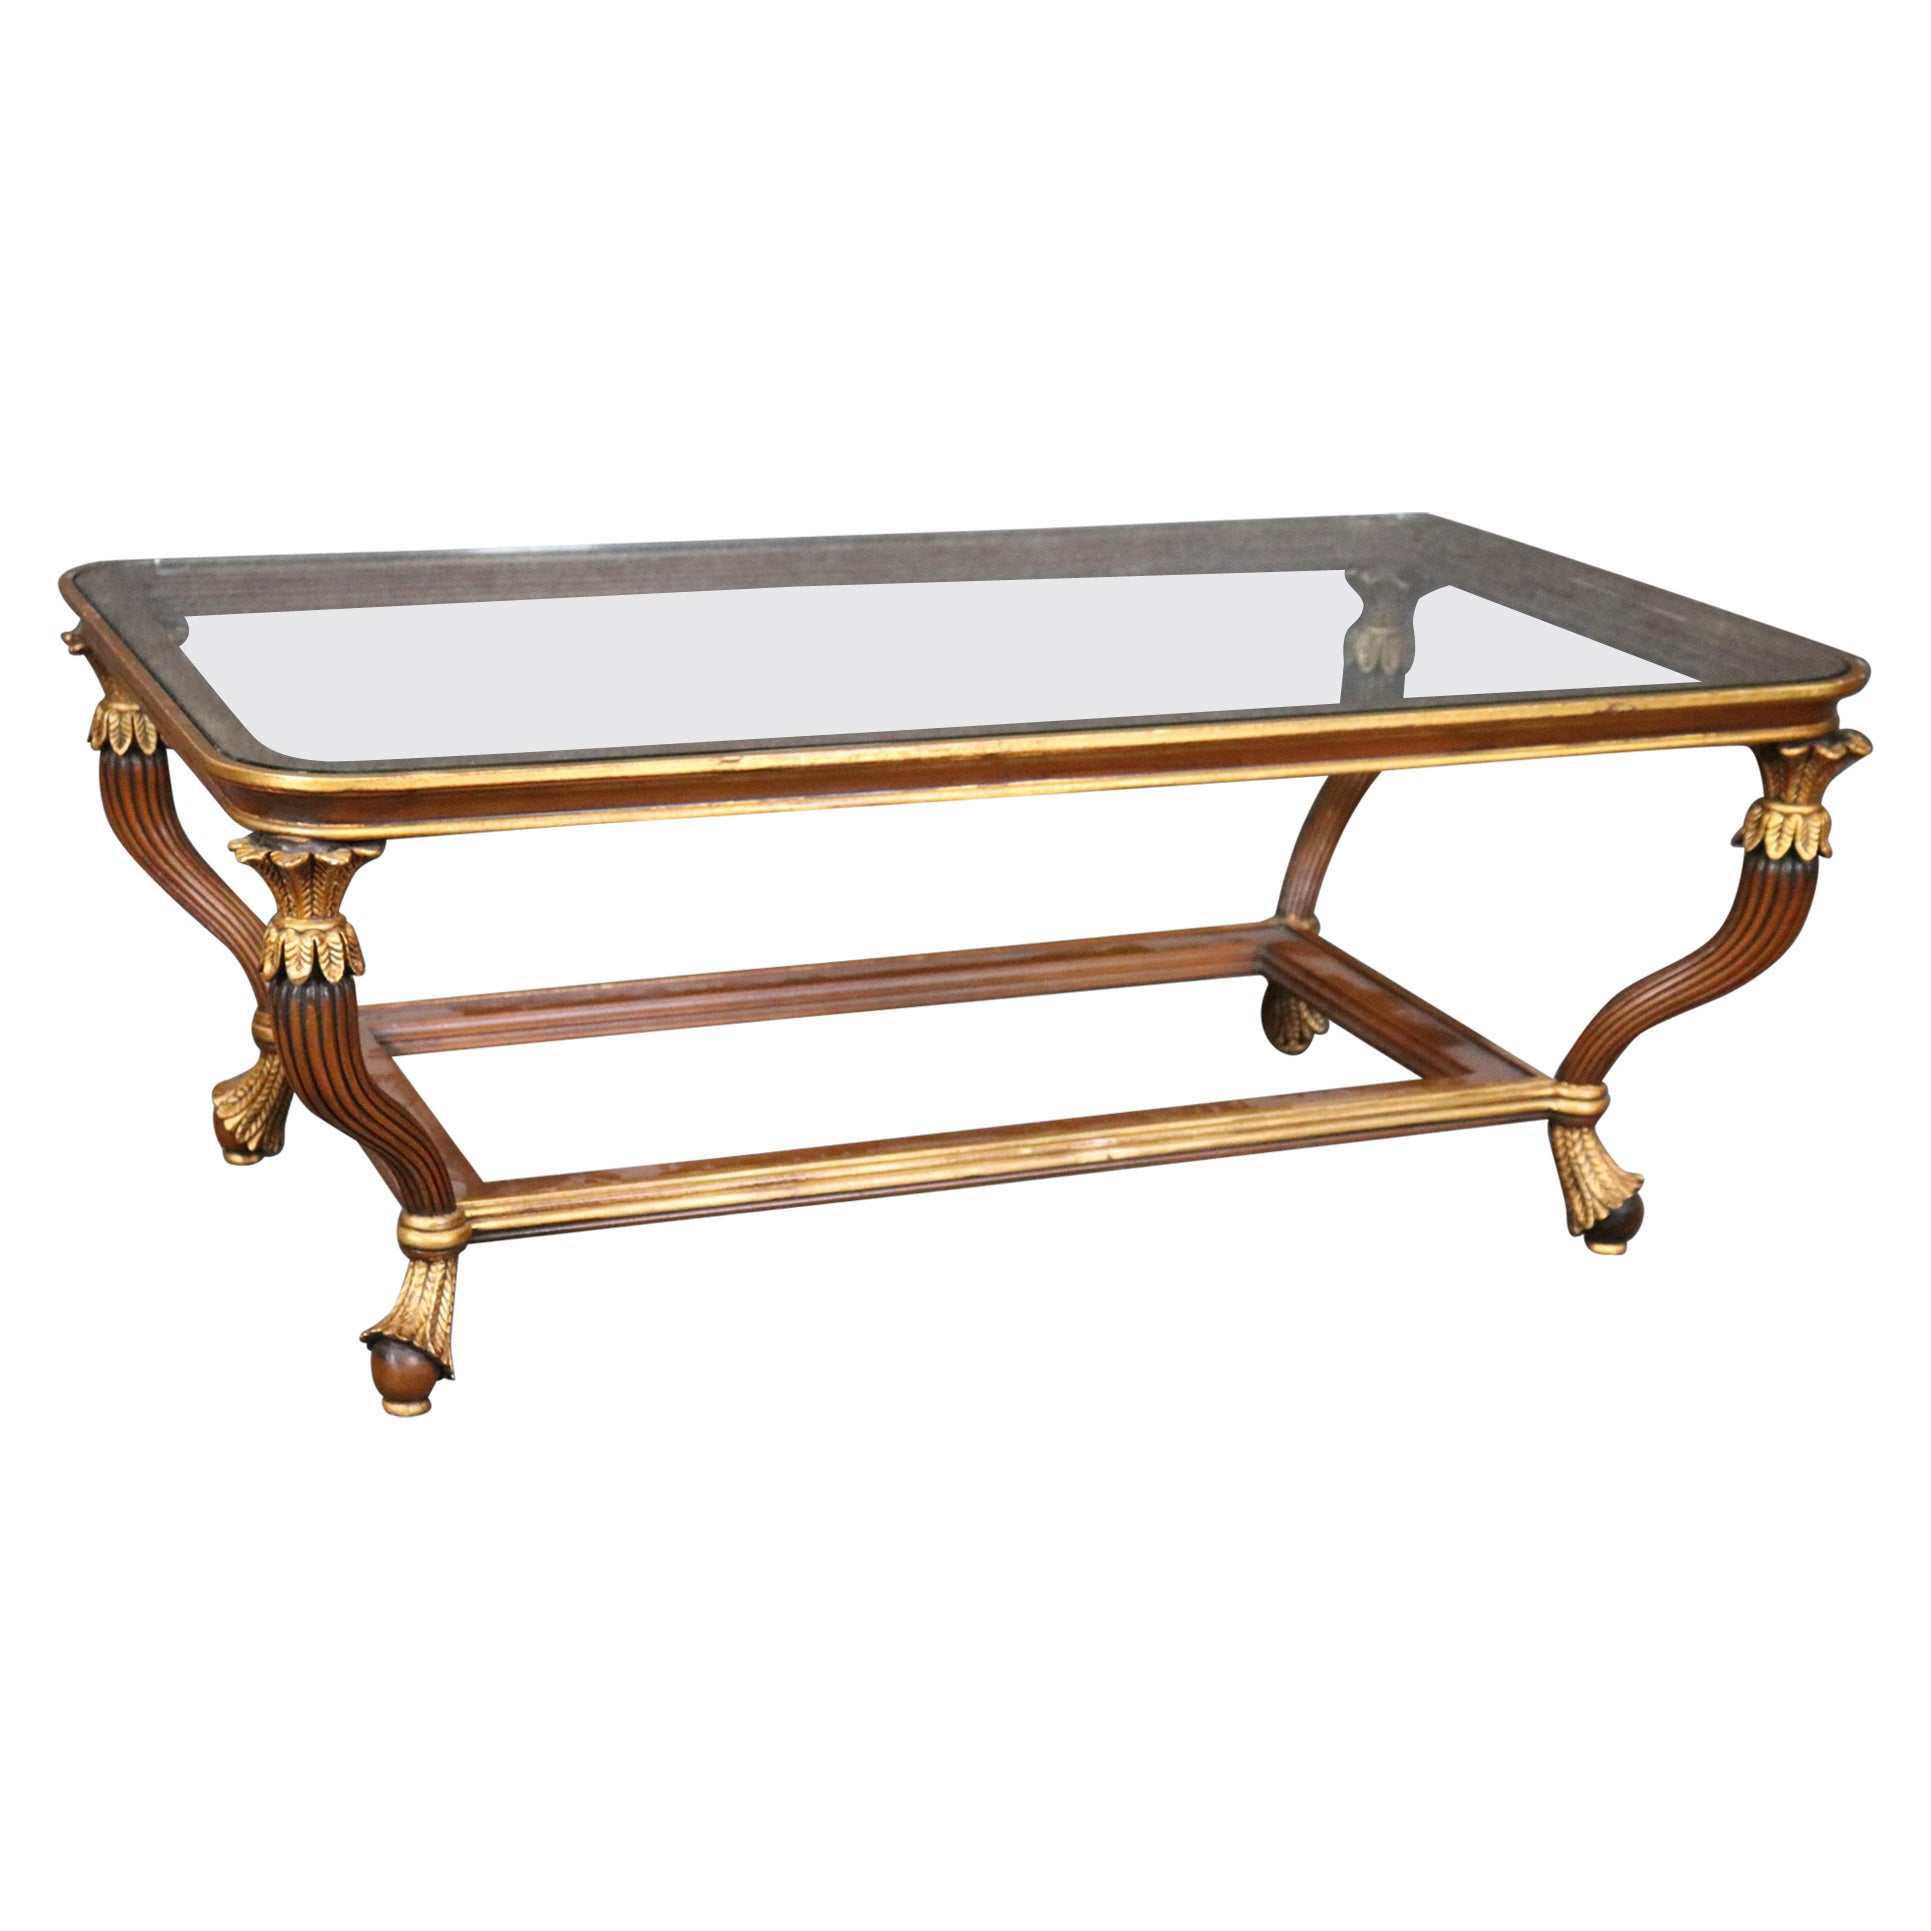 Fine Quality Gilded French Empire Style Rectangular Glass Top Coffee Table  For Sale